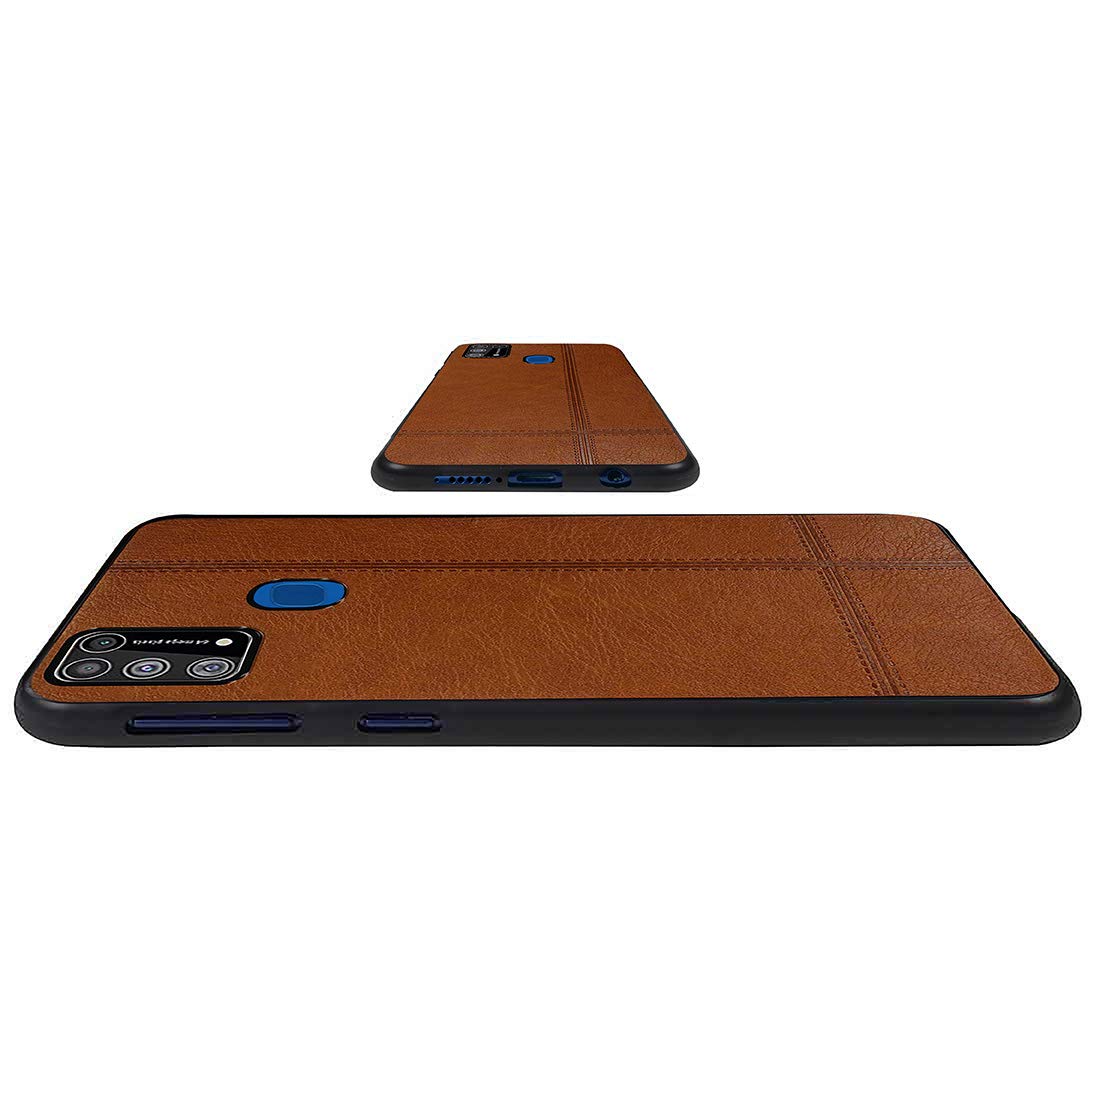 Leather TPU Back Cover for Samsung Galaxy M31 Prime / M31 / F41